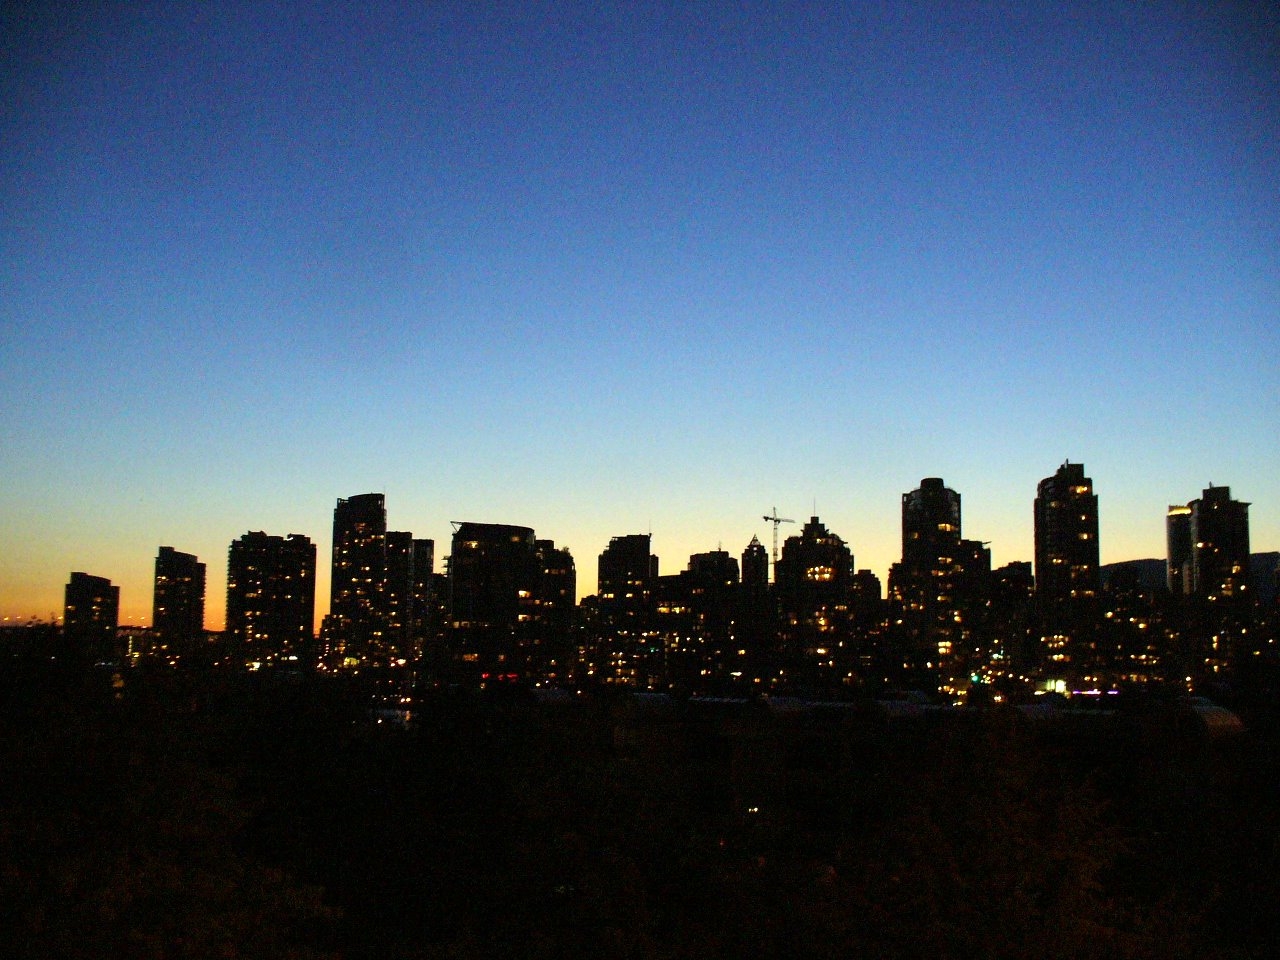 Canada Day Night view from Cambie Bridge